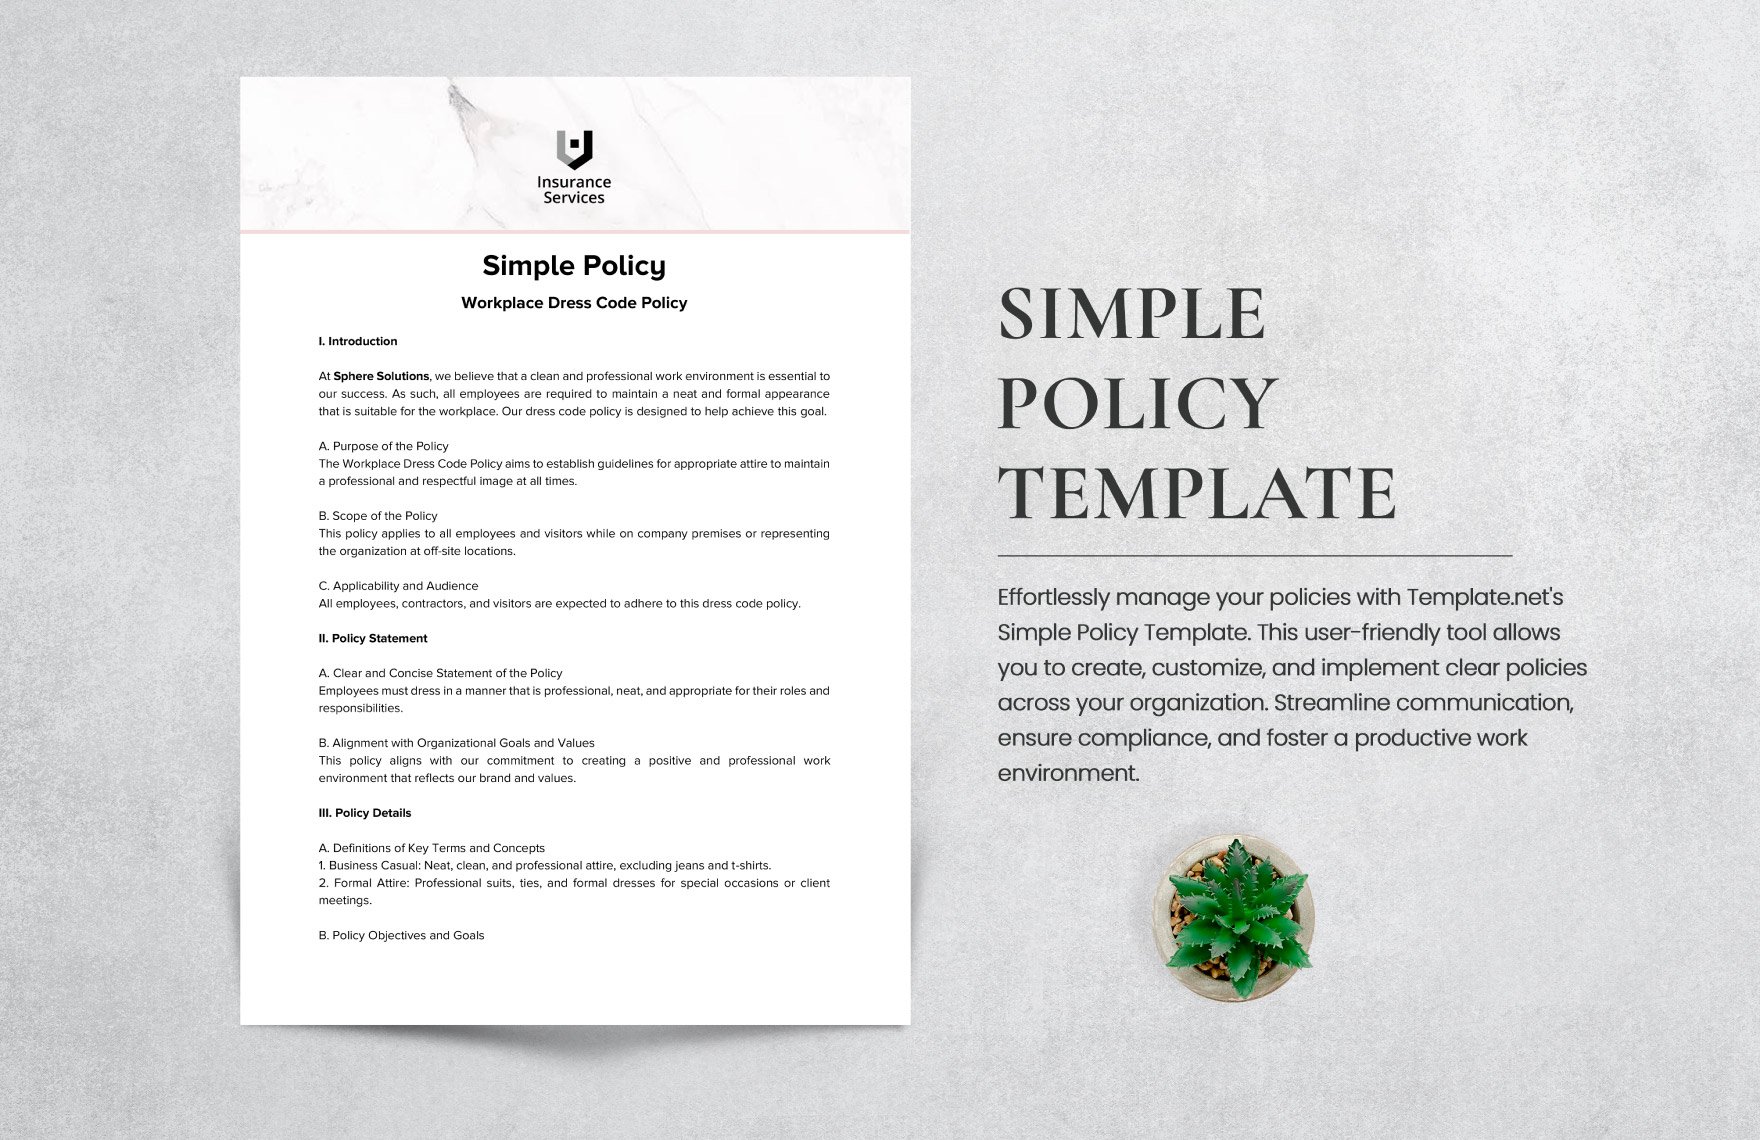 Simple Policy Template